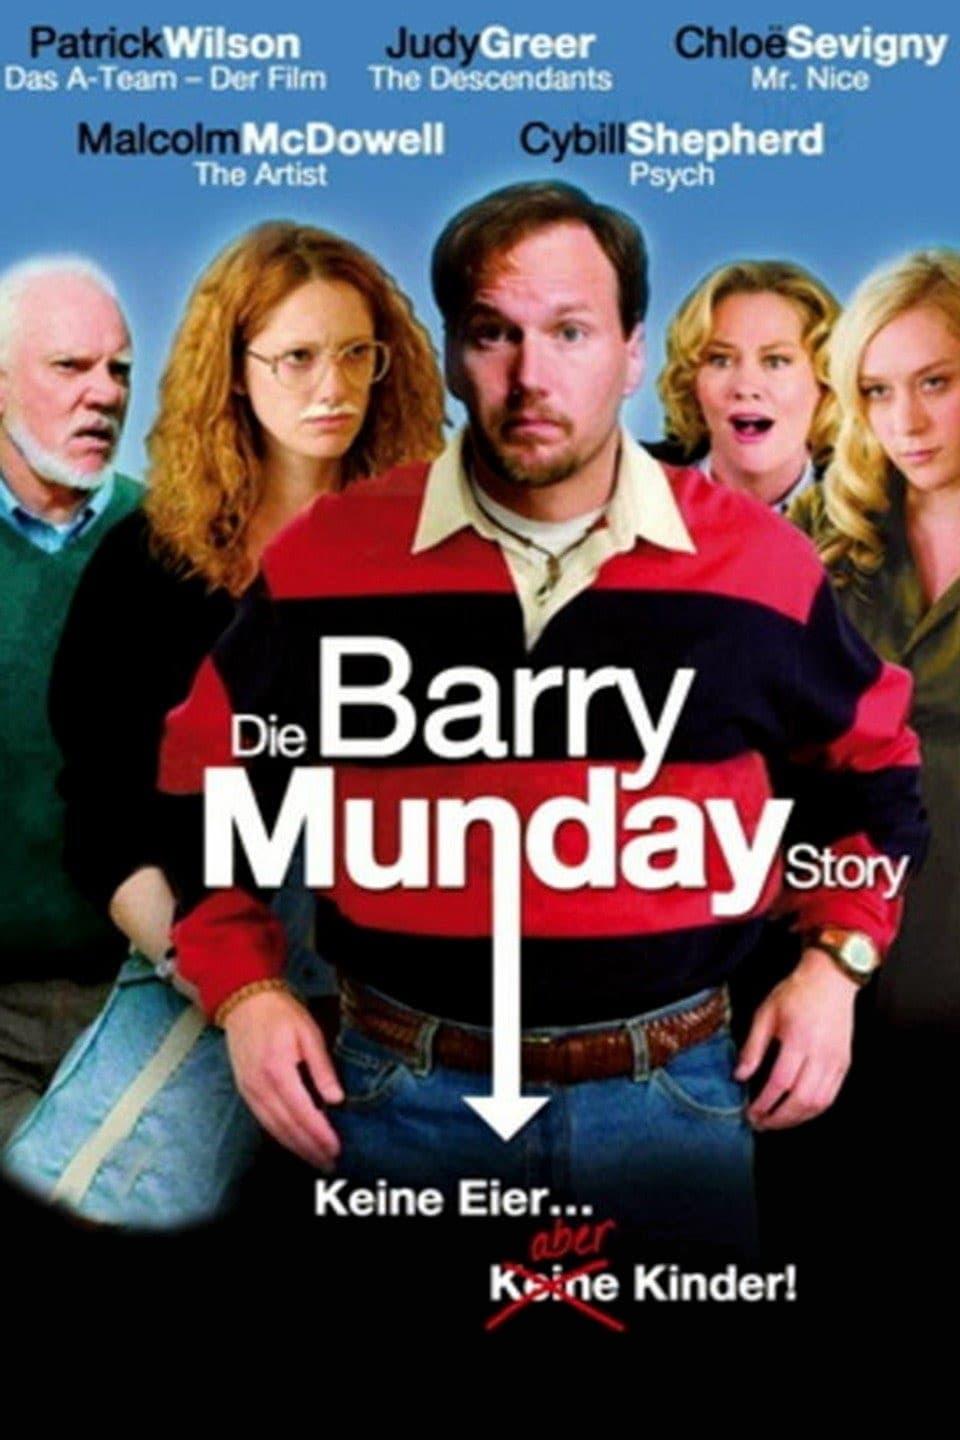 Die Barry Munday Story poster